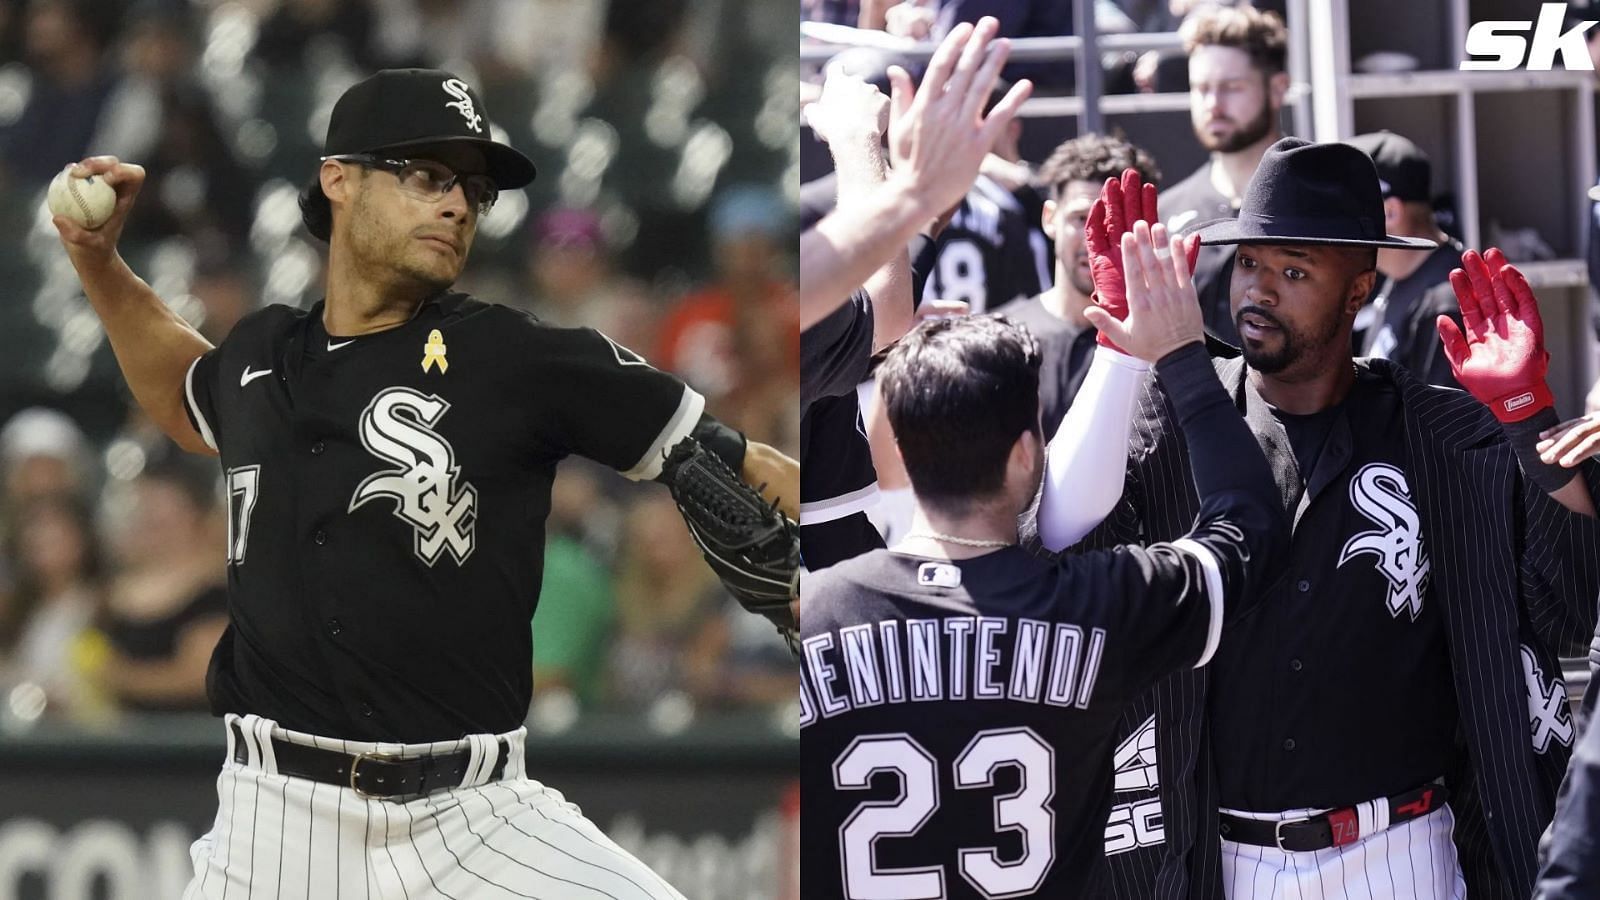 Chicago White Sox reliever Joe Kelly has a solution to boost the team in the standings